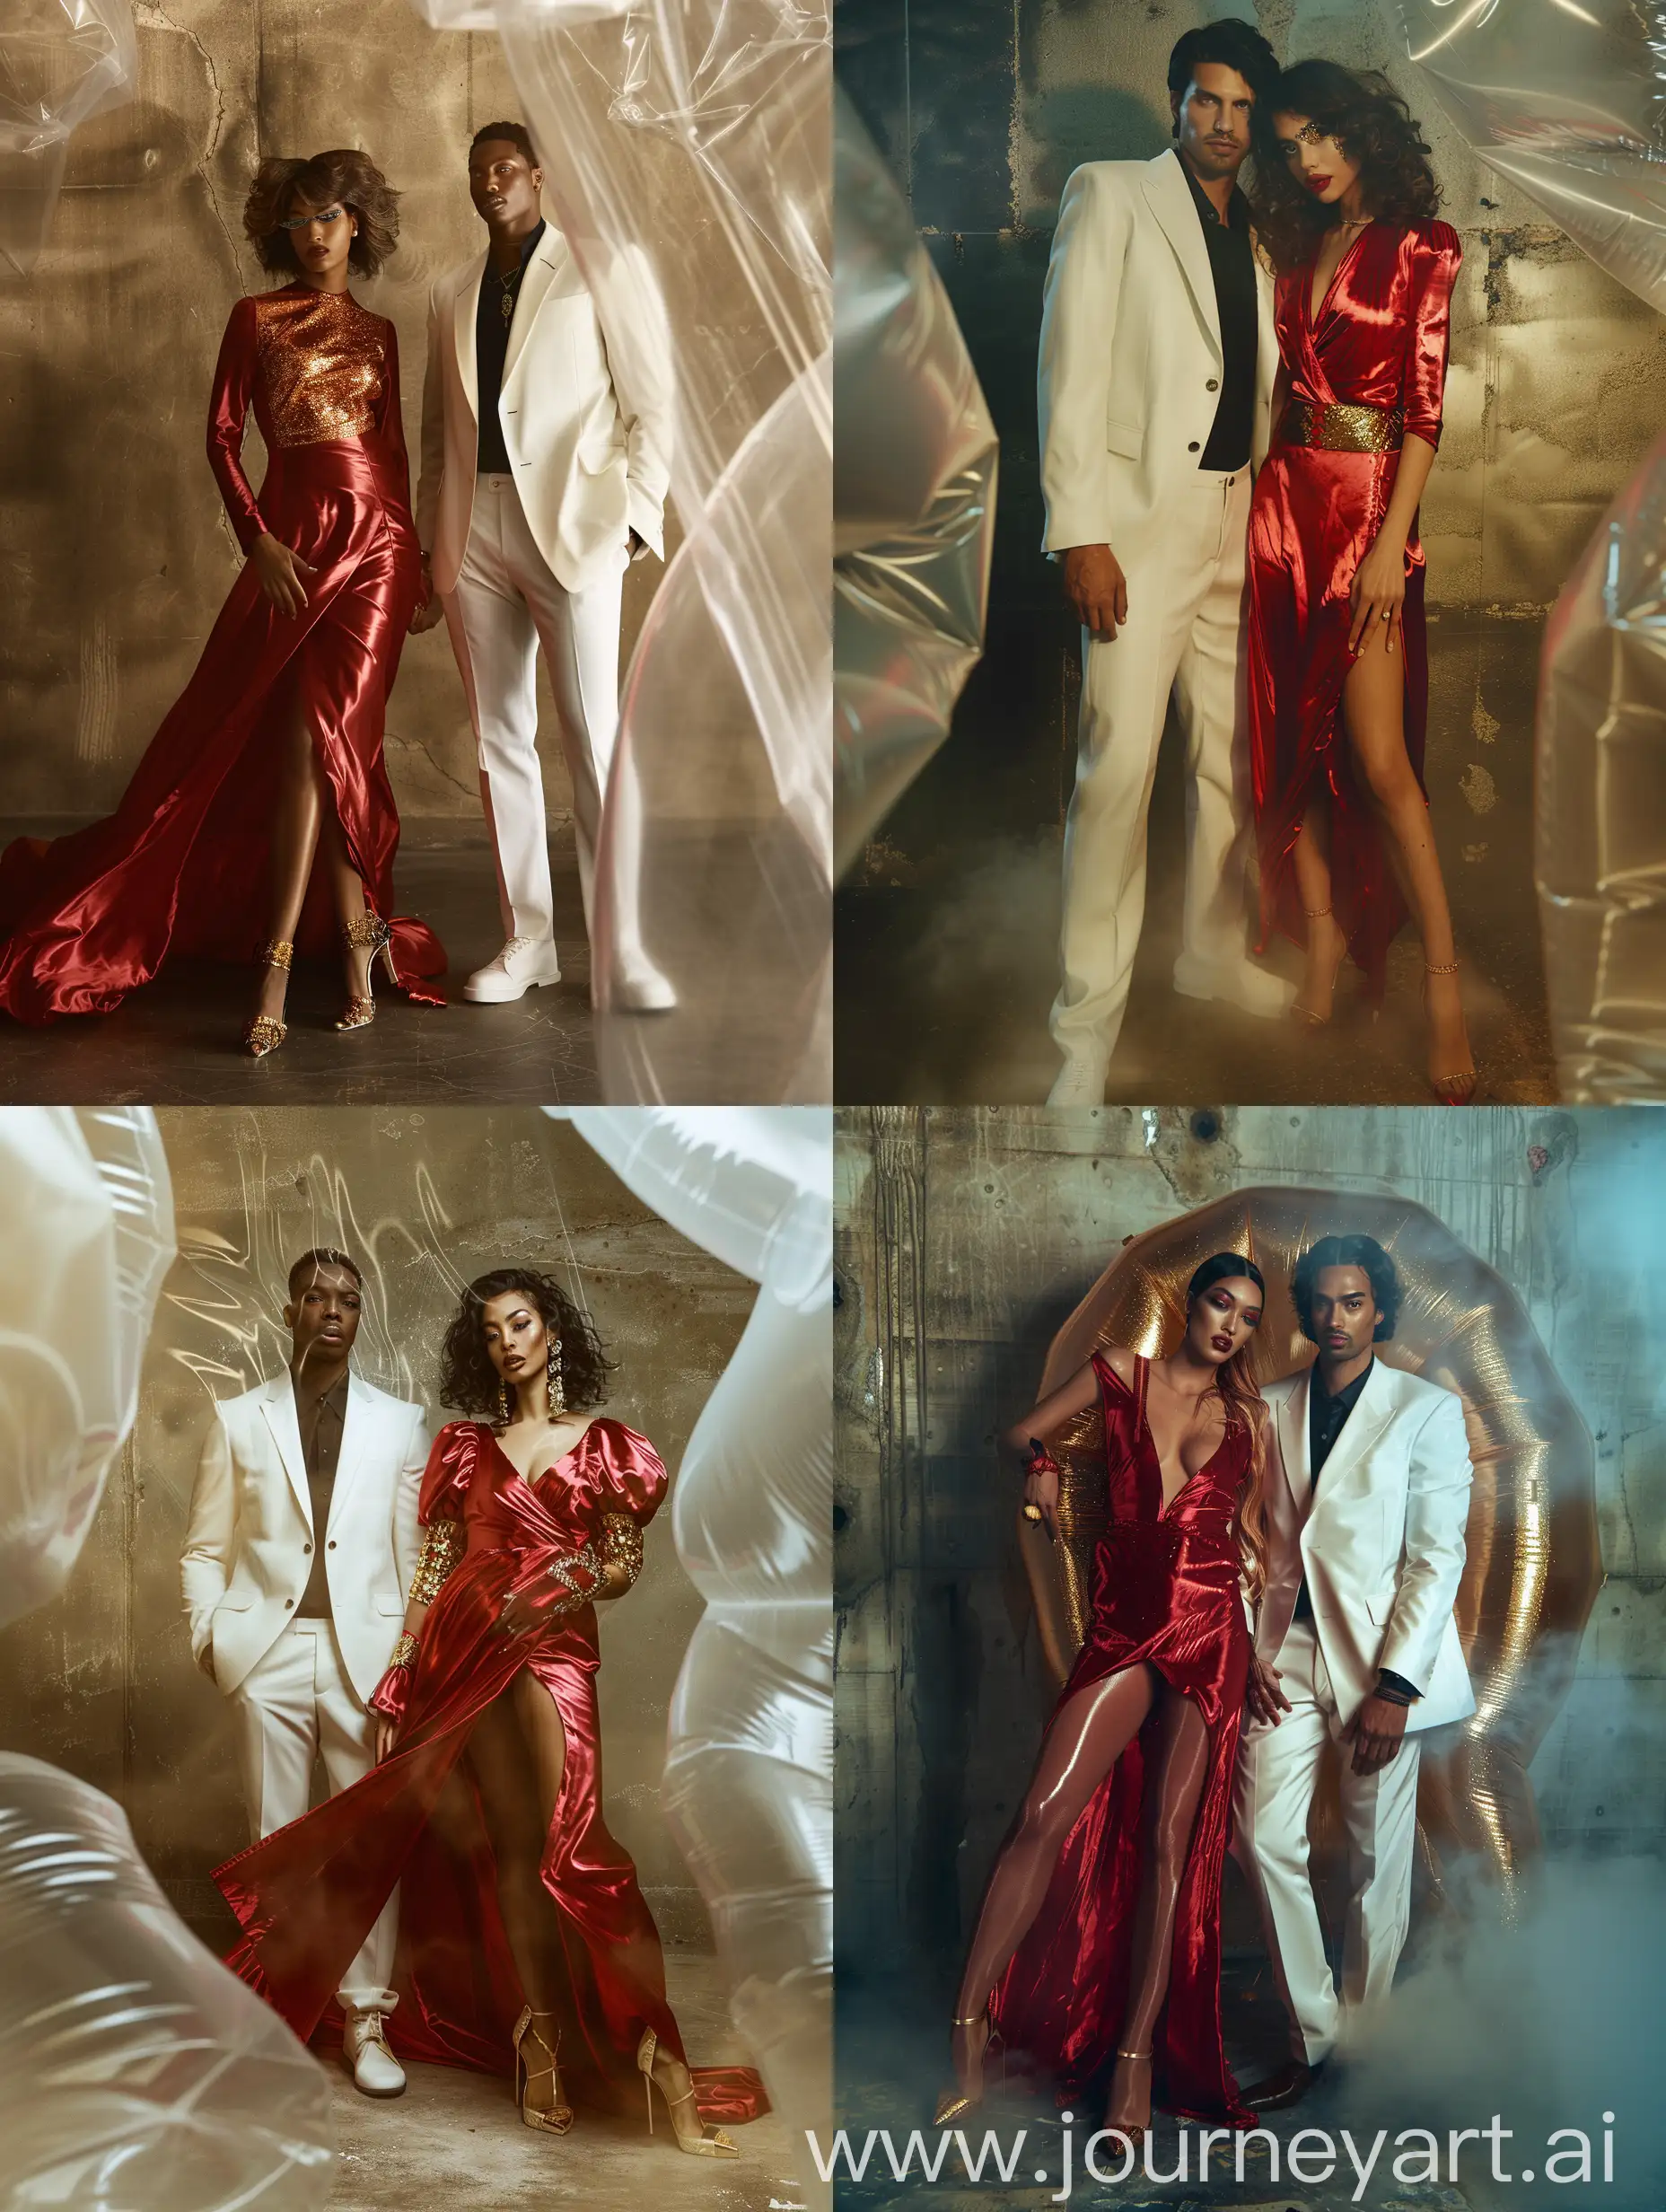 Generate a high-resolution image in an empty studio with a wall room background. The style is an editorial fashion campaign inspired by "Scarface" and Miami in the 1980s, featuring a close-up portrait of a couple in glamorous, opulent attire with a Heron Preston streetwear twist. Apply an Action Film Look-Up Table (LUT) for rich colors and dramatic tones, and use camera blur and haze for a dreamy, cinematic effect. The nighttime theme should be evident through dramatic lighting. The woman wears a red silk dress with gold accents, high heels, voluminous waves, and dramatic makeup. The man wears a white suit, black shirt, and gold accessories. Include an intricate inflatable technical textile as the main element, ensuring detailed textures are prominent. The aspect ratio is 4:5 (vertical).